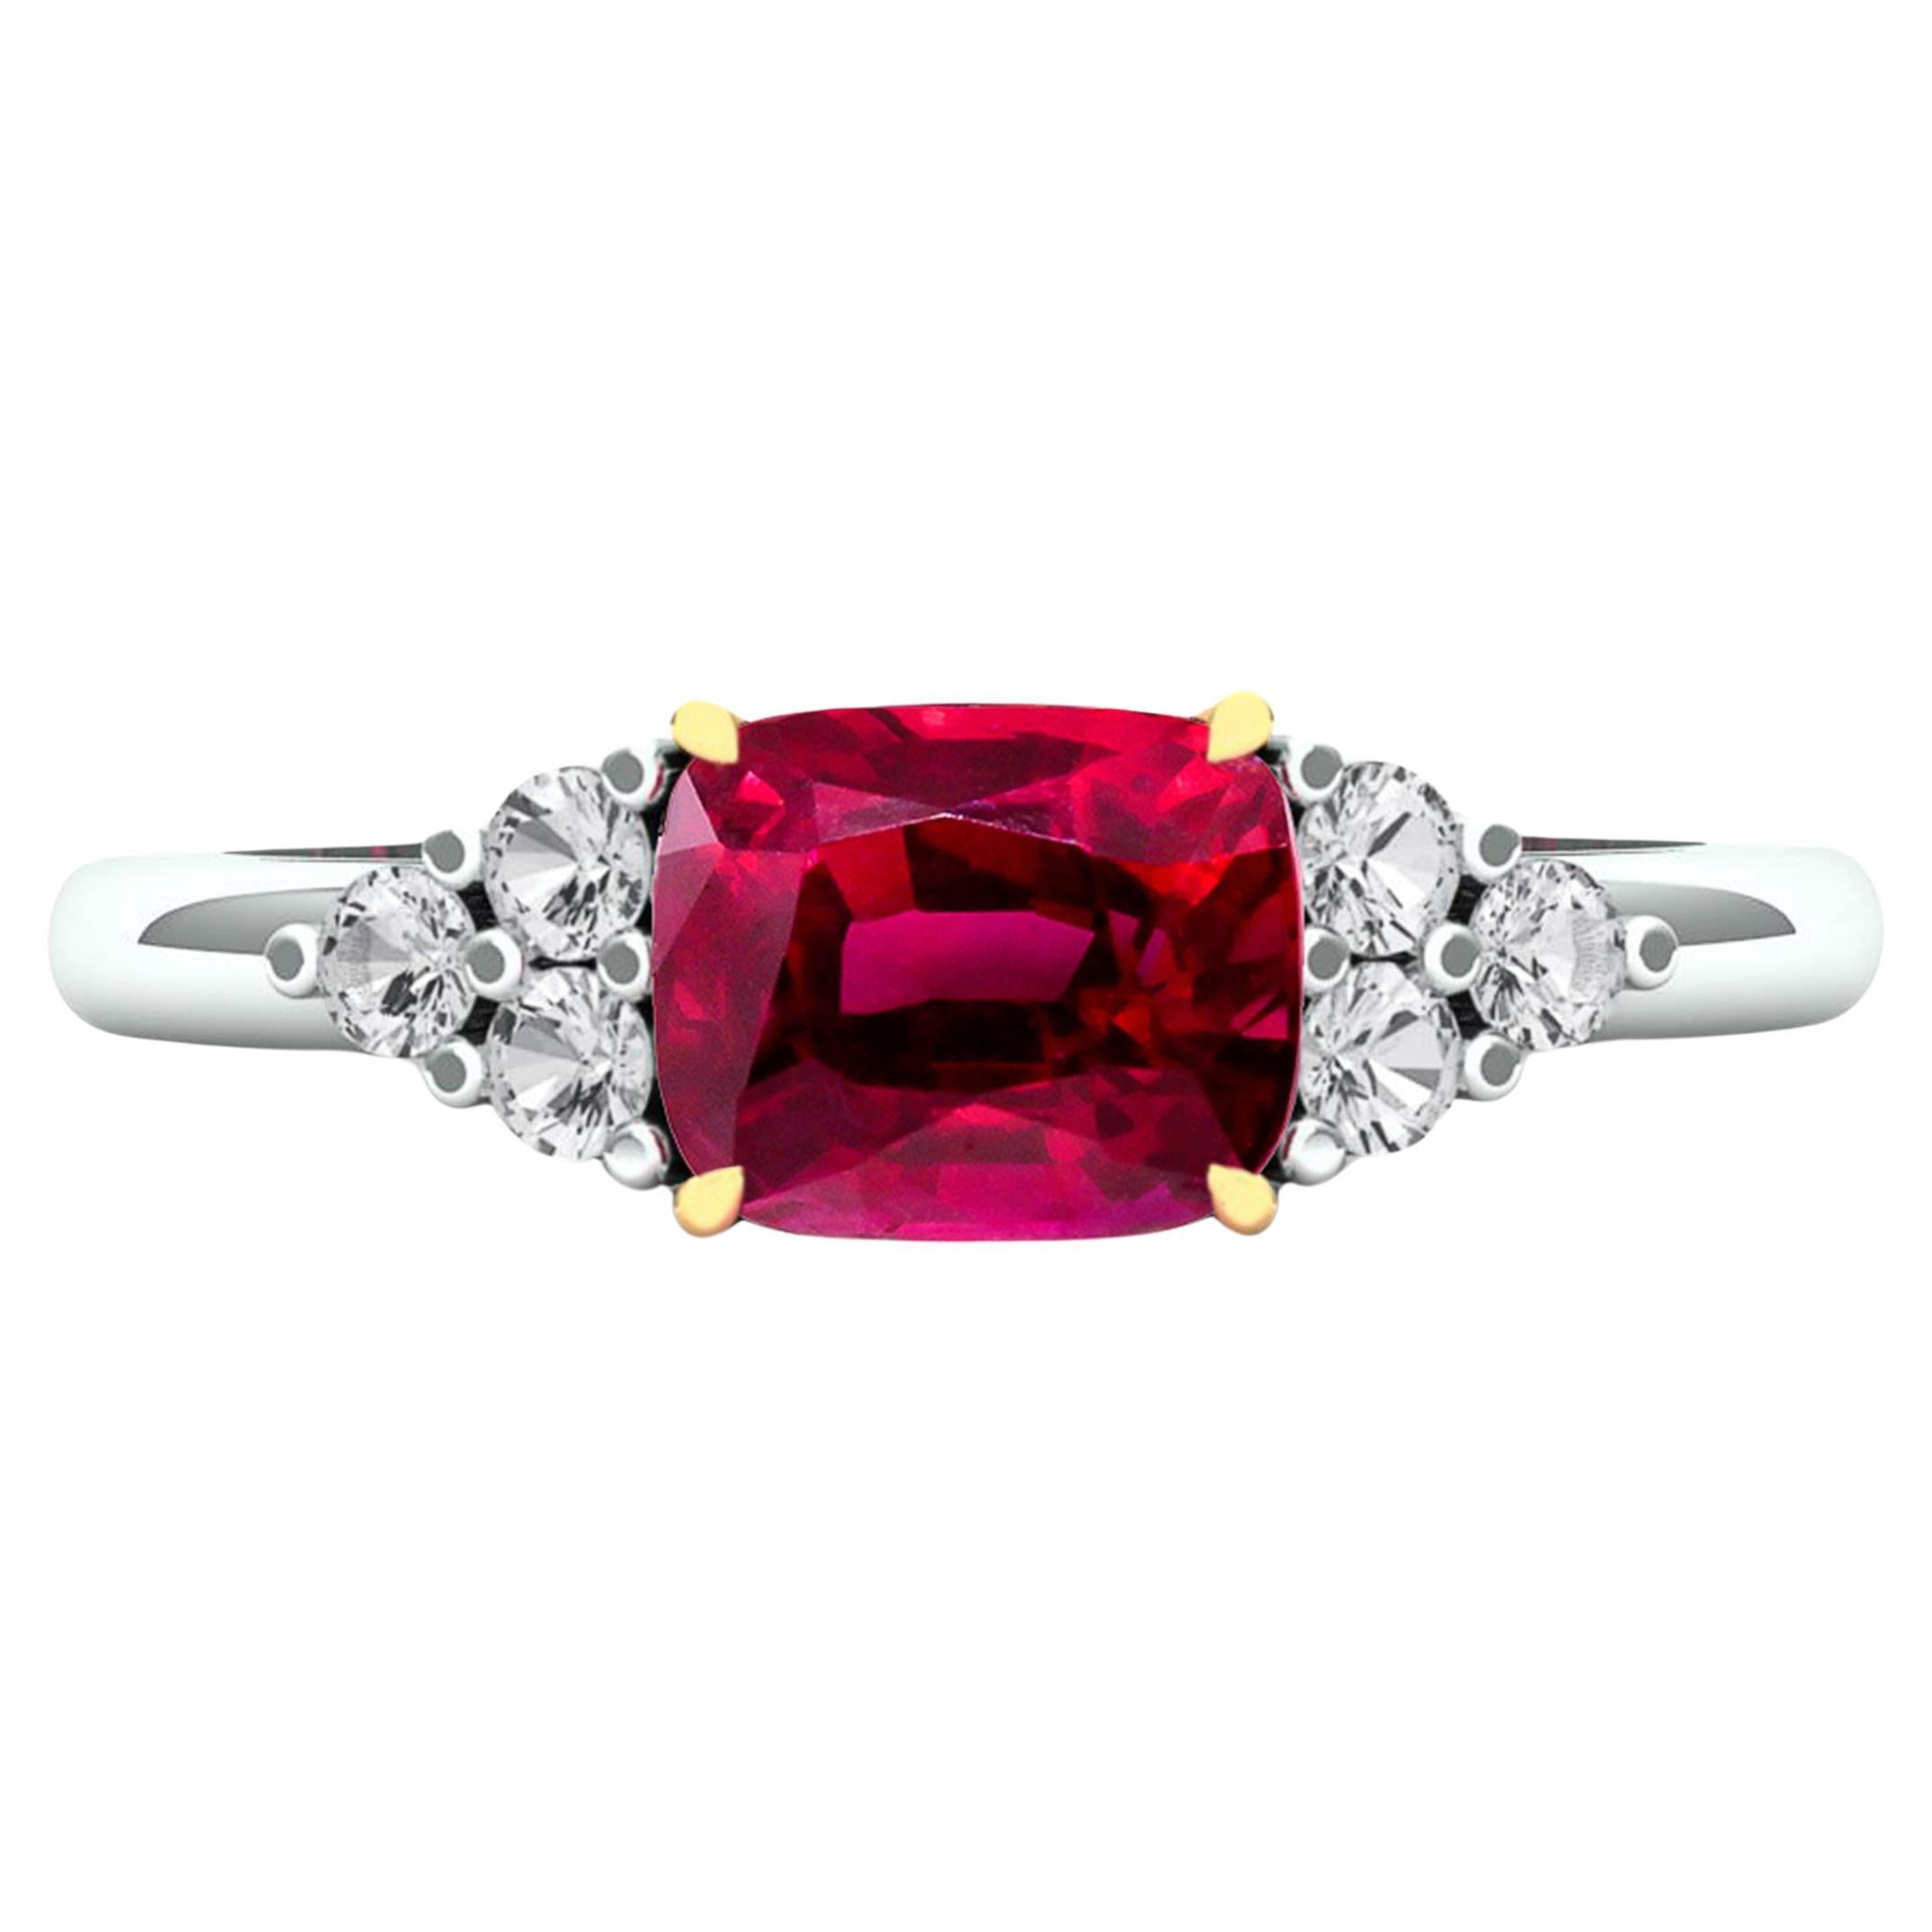 Vintage 2.20 Natural Untreated Ruby Up 4.15 Carat Diamond Bombe Ring ...